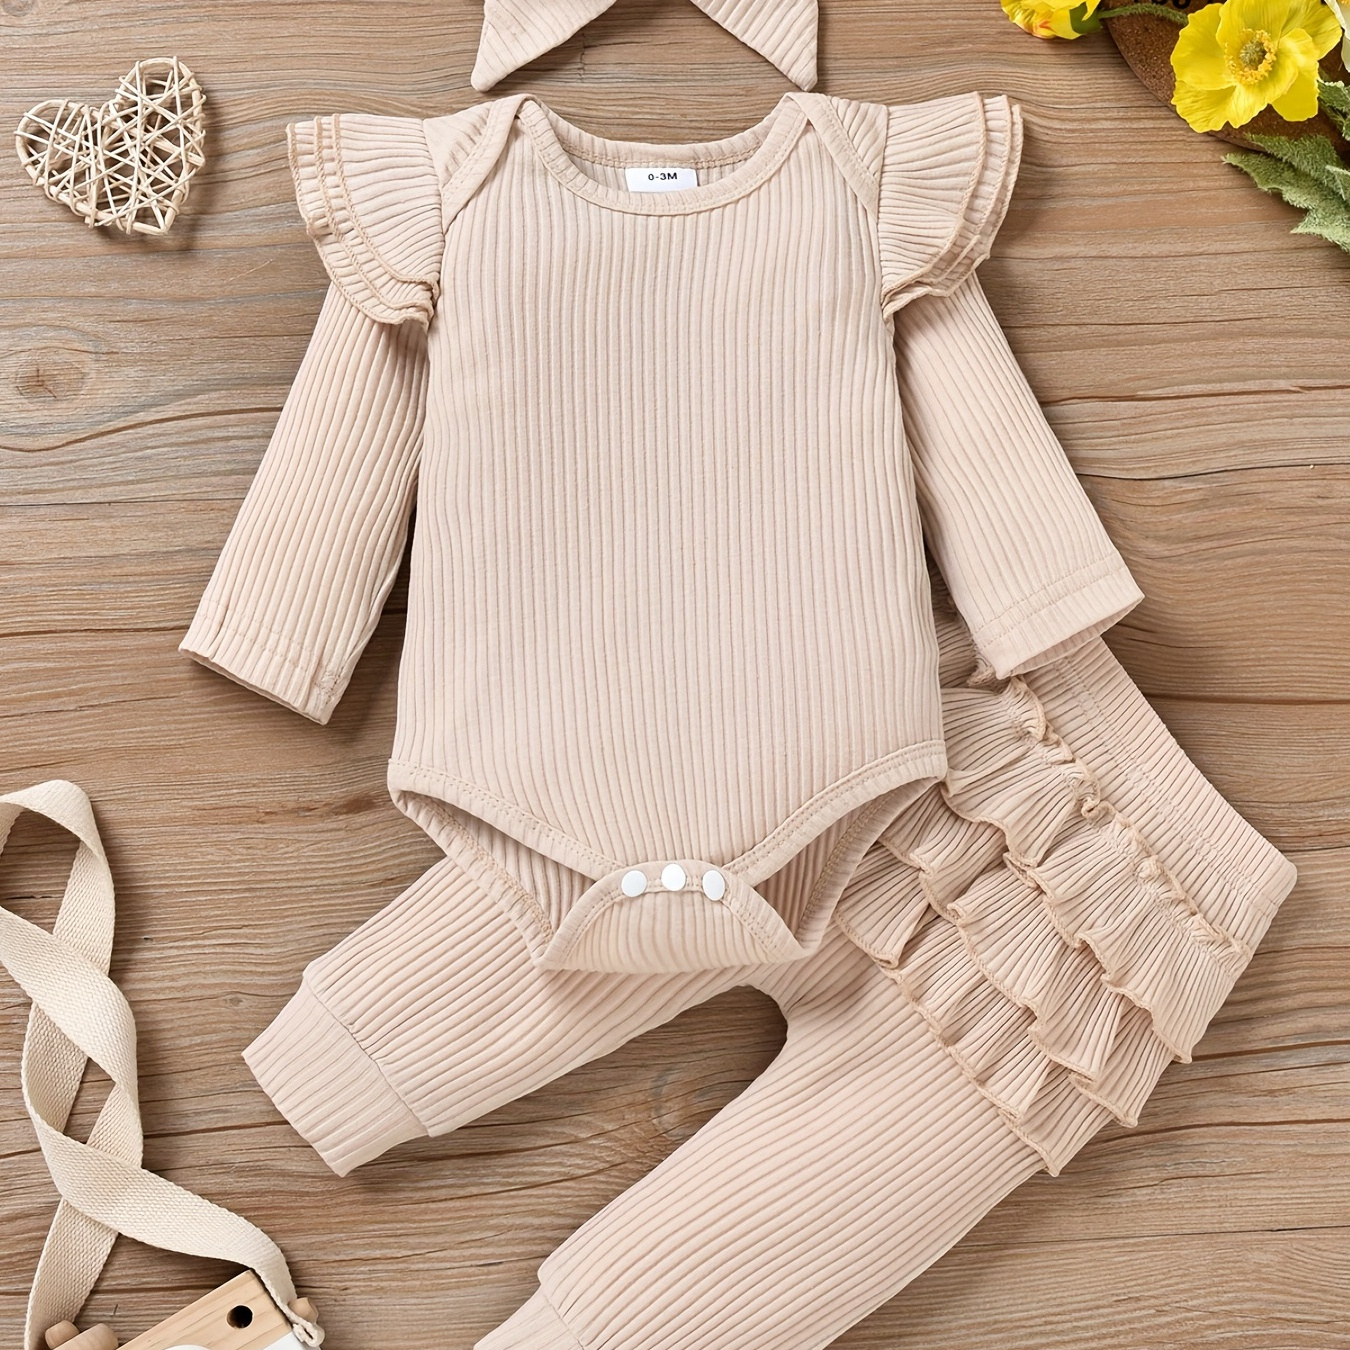 

Baby Girl Clothes Newborn Romper Long Sleeve Infant Outfits 3pcs Ruffle Tops + Pants + Headband 0-18 Months